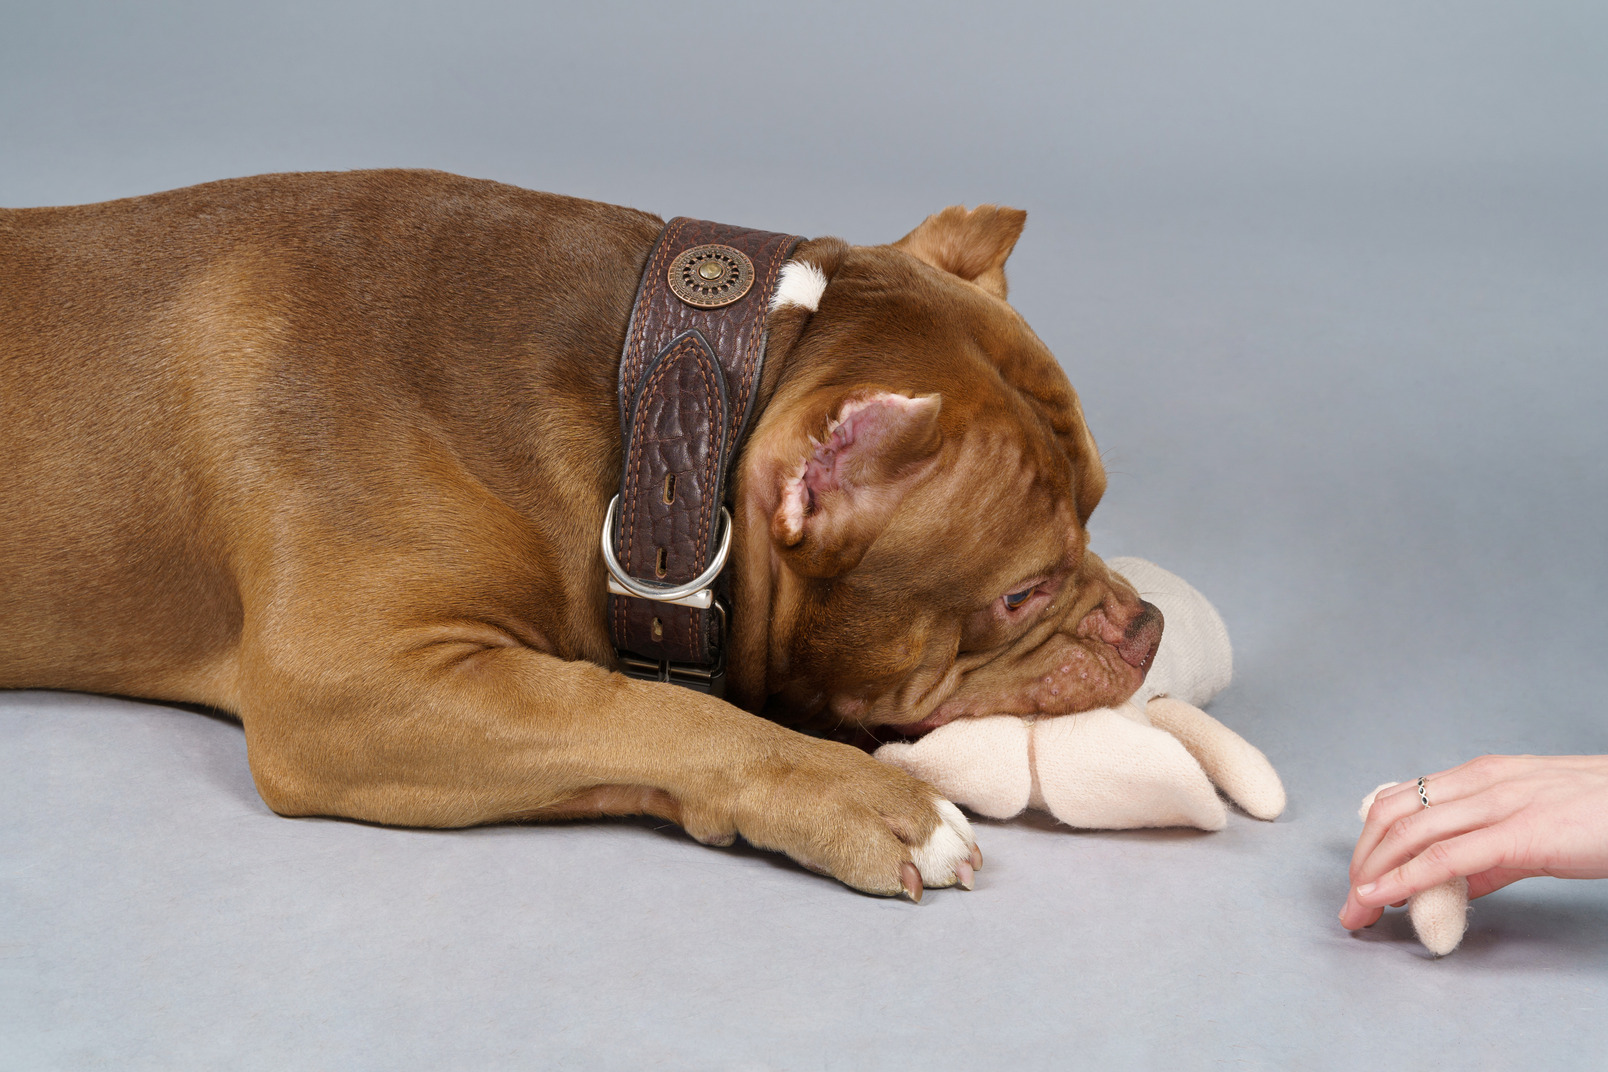 Side view of a brown bulldog biting a toy bunny